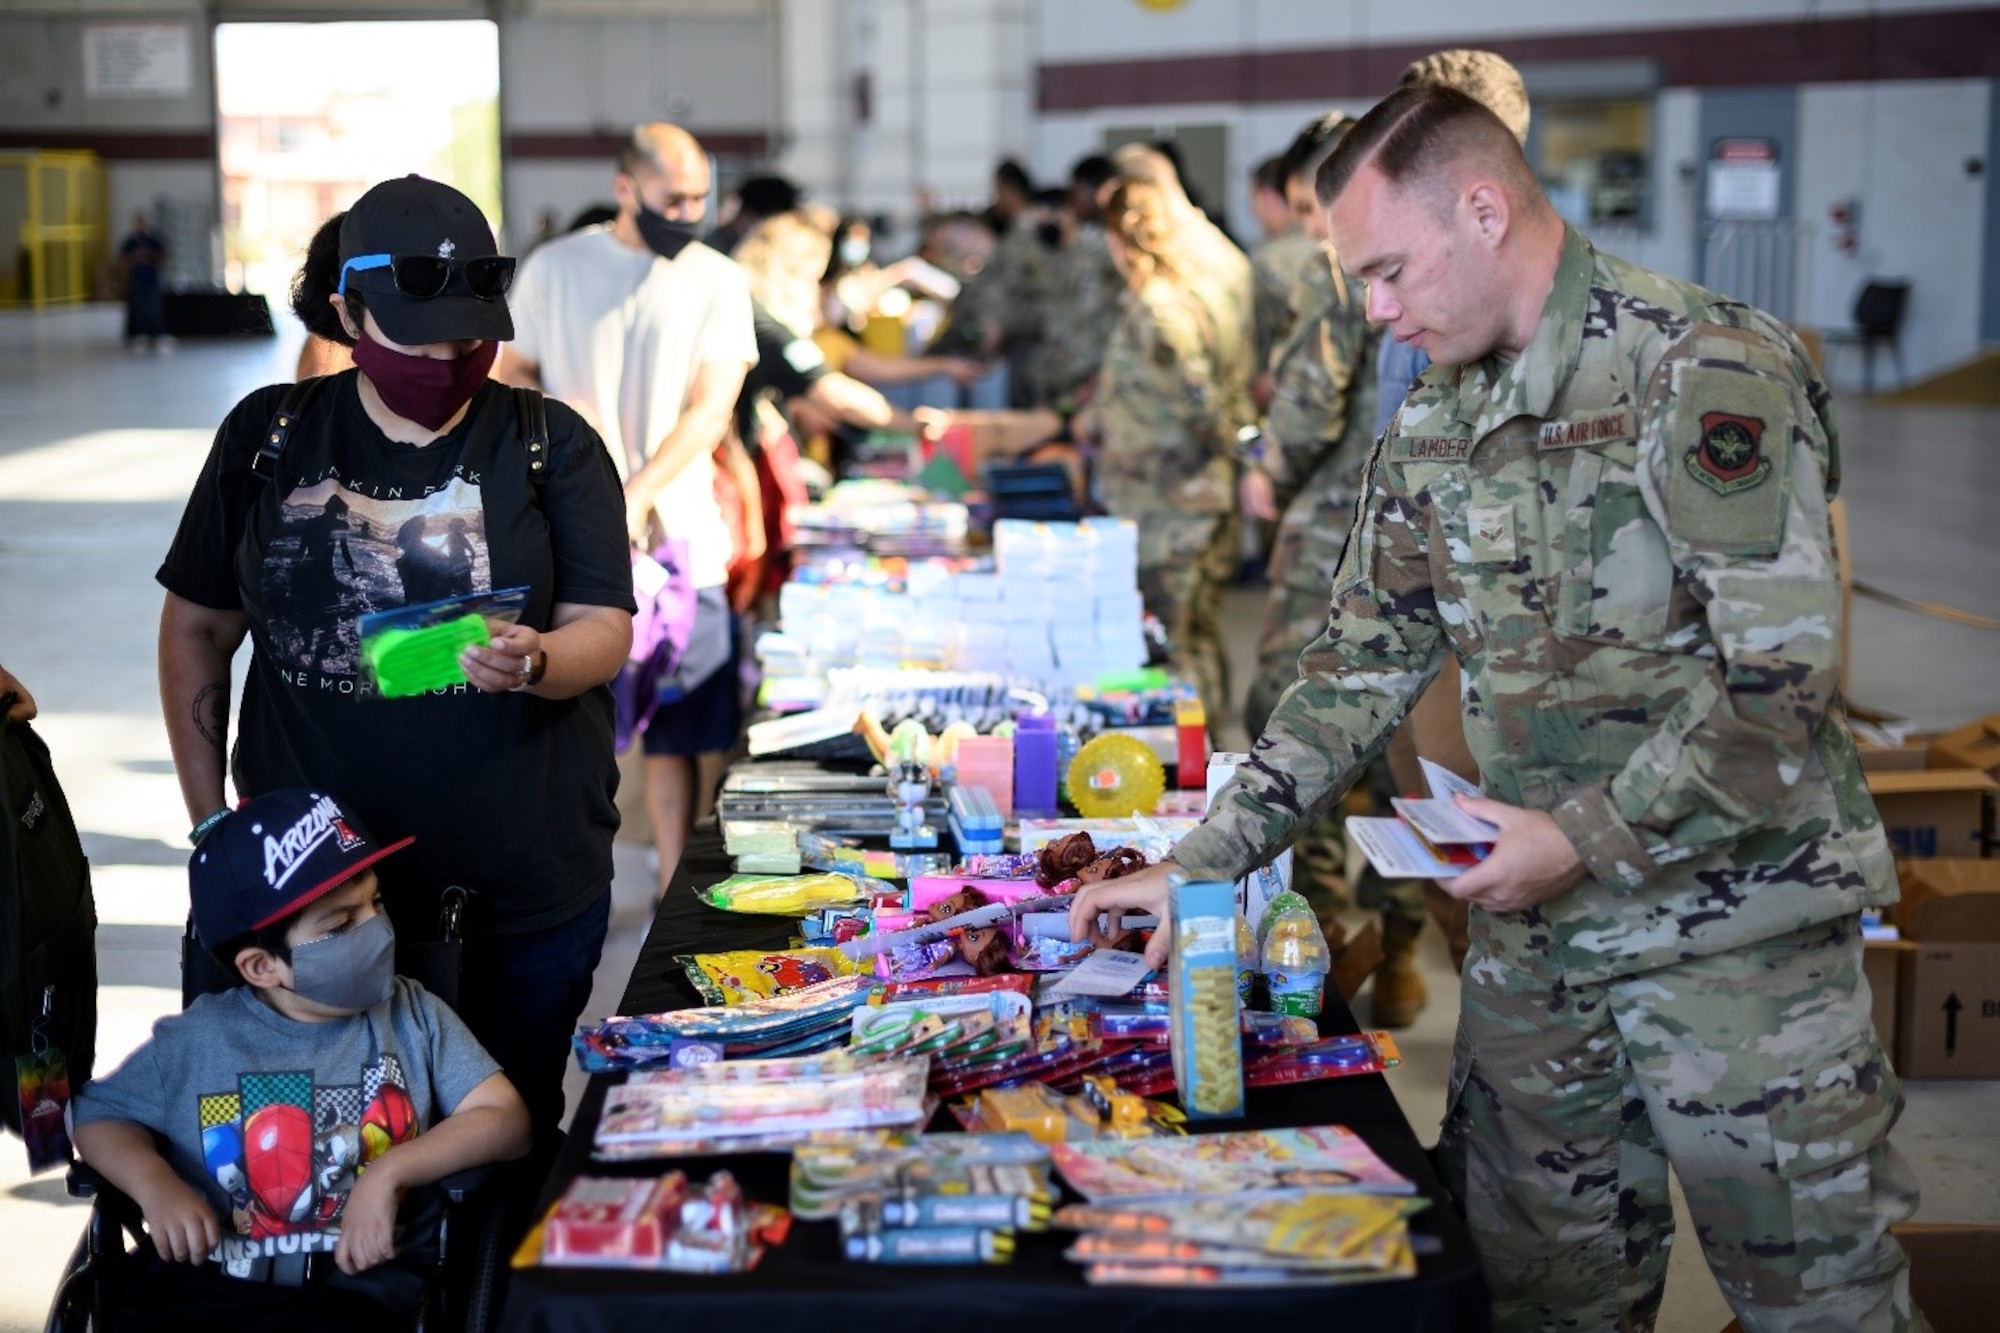 Airmen, parents and students line up along a string of tables to look over a selection of free school supplies during the Back-to-School Brigade July 23, 2021, at Travis Air Force Base, California. The school supplies are given away for free as part of the base’s annual tradition of ensuring all returning students have the resources they need ahead of the start of the new school year. (U.S. Air Force photo by Staff Sgt. Christian Conrad)